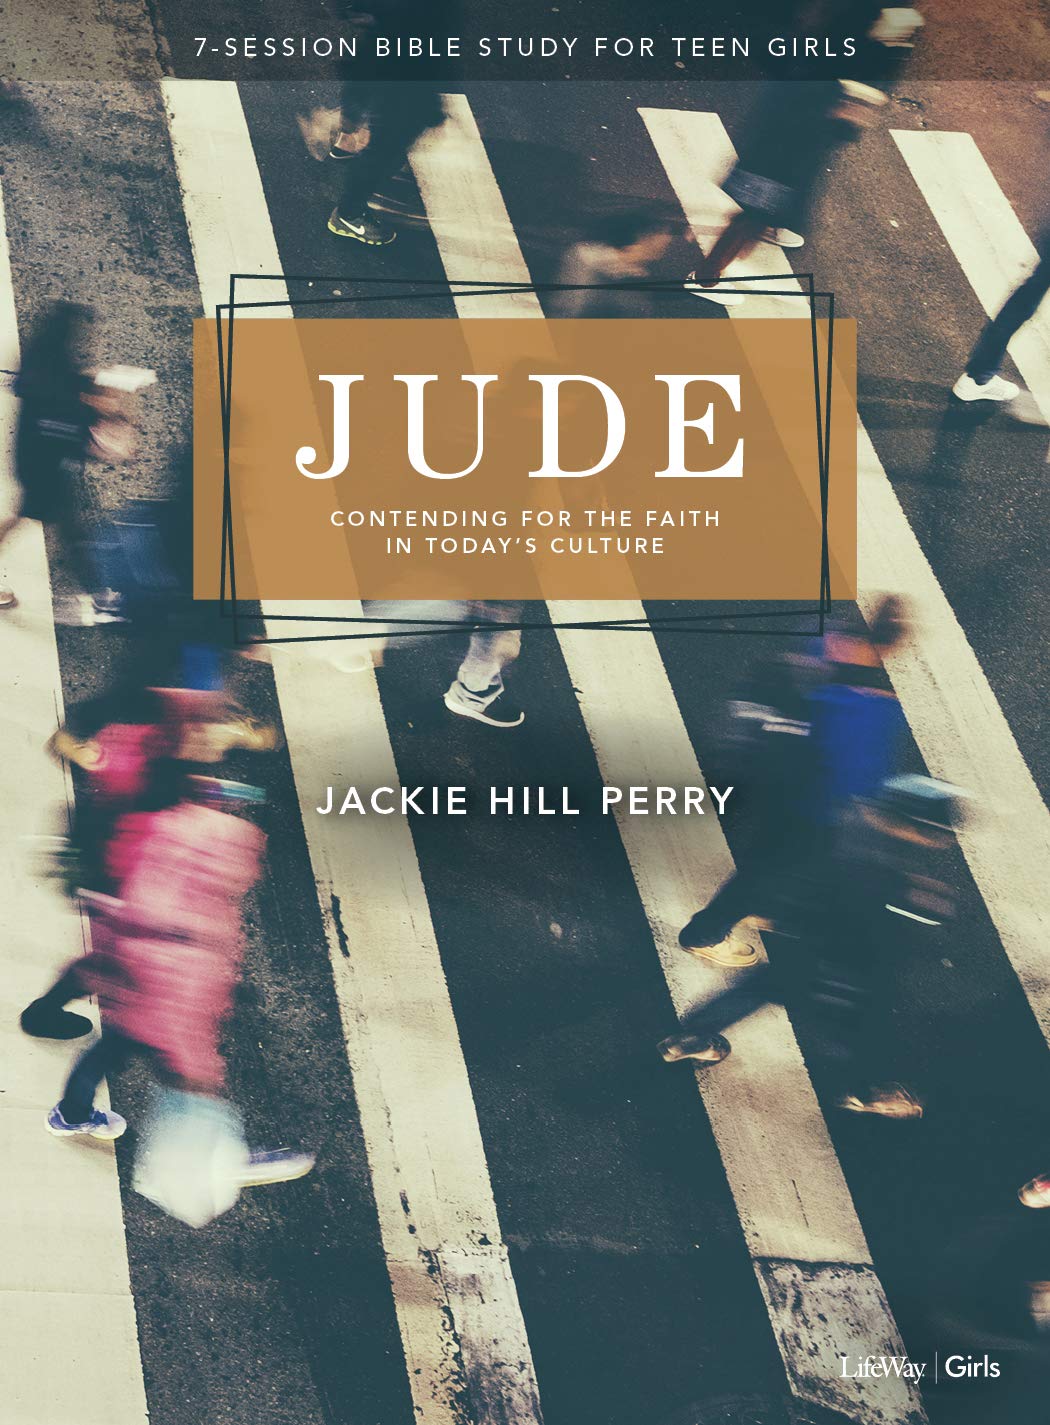 Jude - Teen Girls' Bible Study Book: Contending for the Faith in Today?s Culture (7- Session Bible Study for Teen Girls)